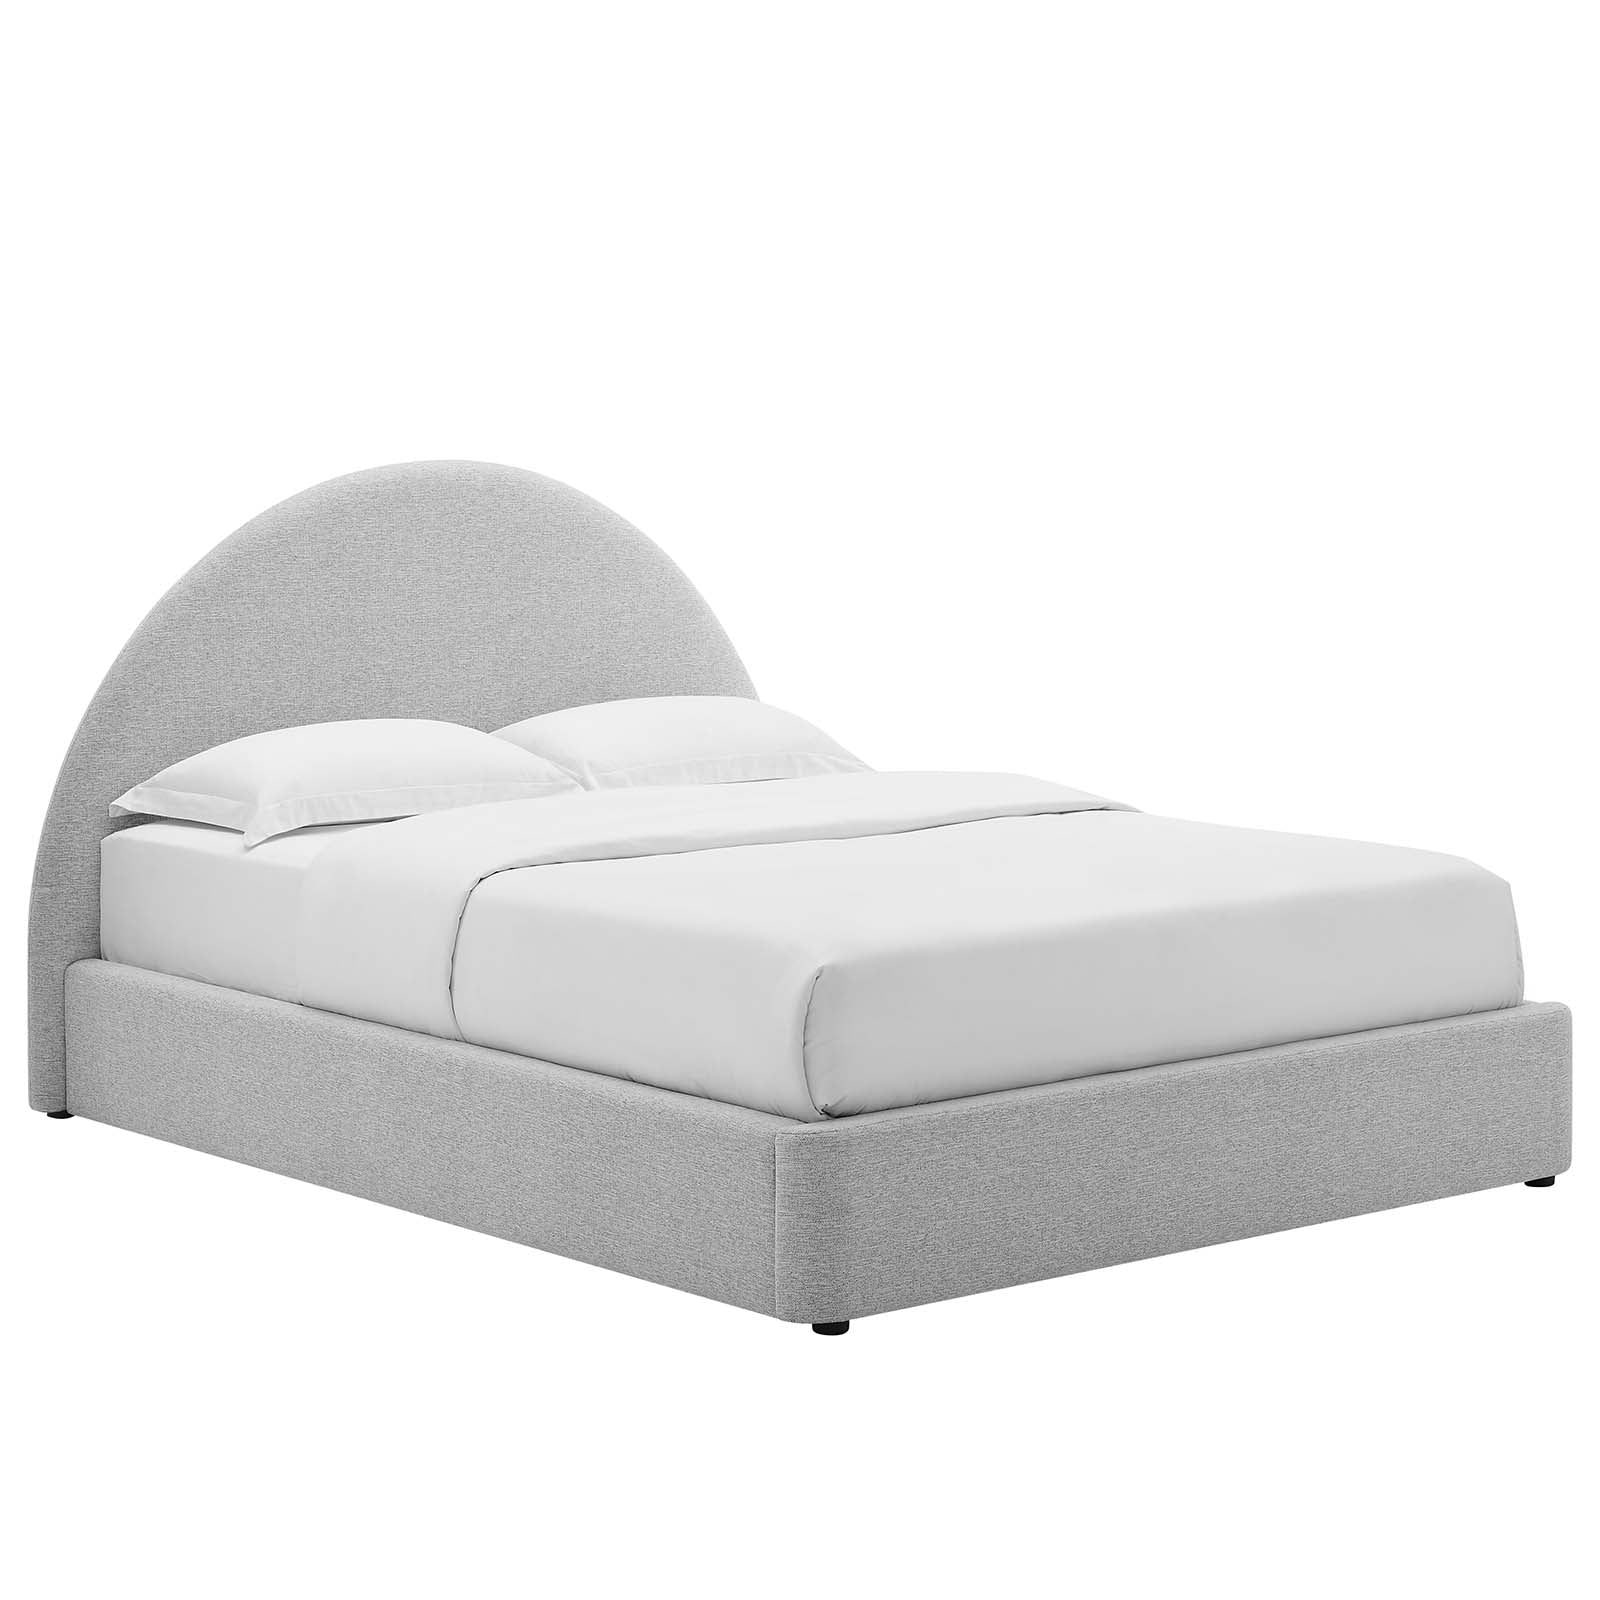 Resort Upholstered Fabric Arched Round Twin Platform Bed